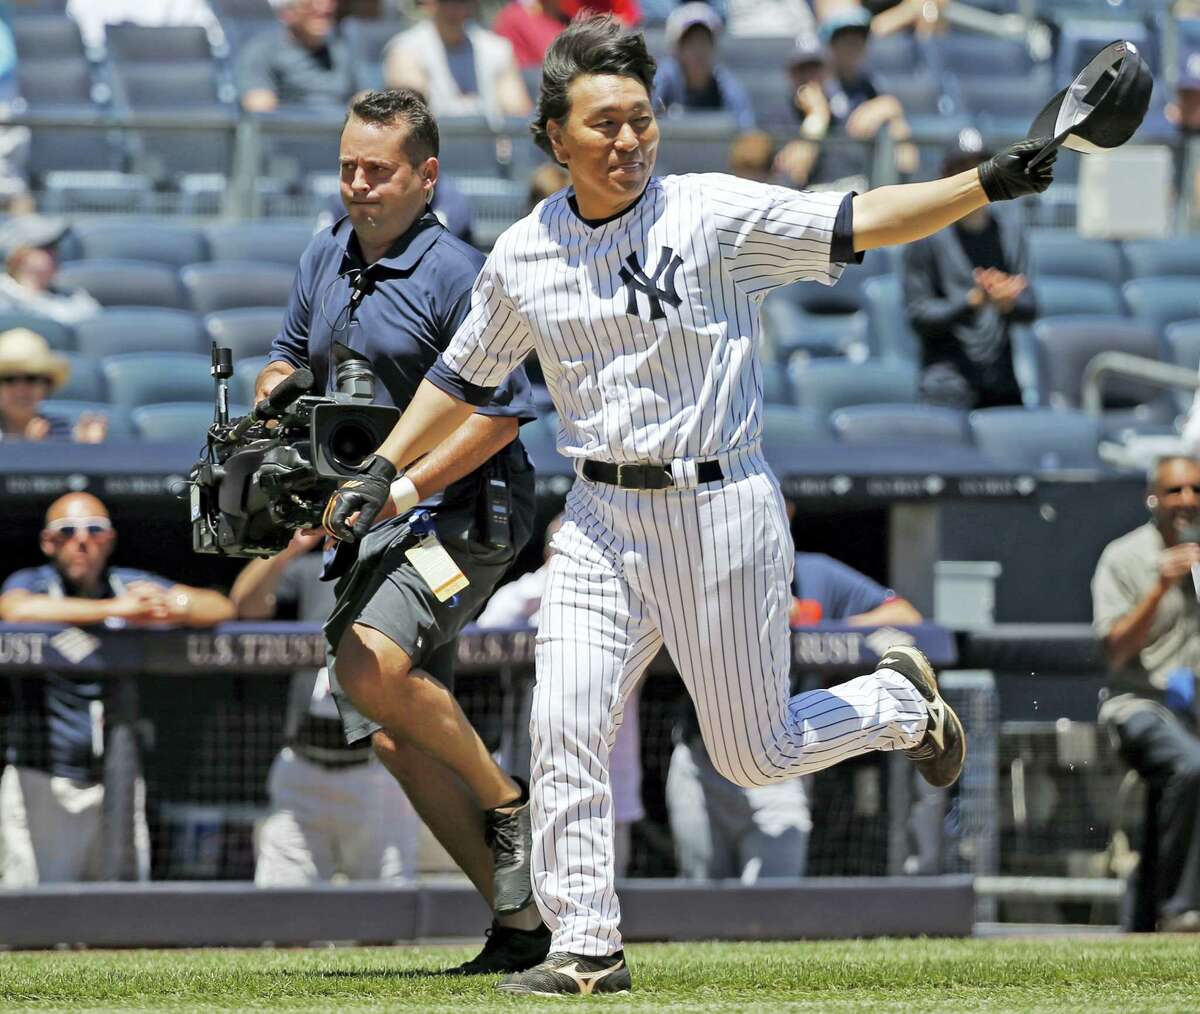 Never too old: Hideki Matsui hits long HR on Yankees' Old-Timers' Day